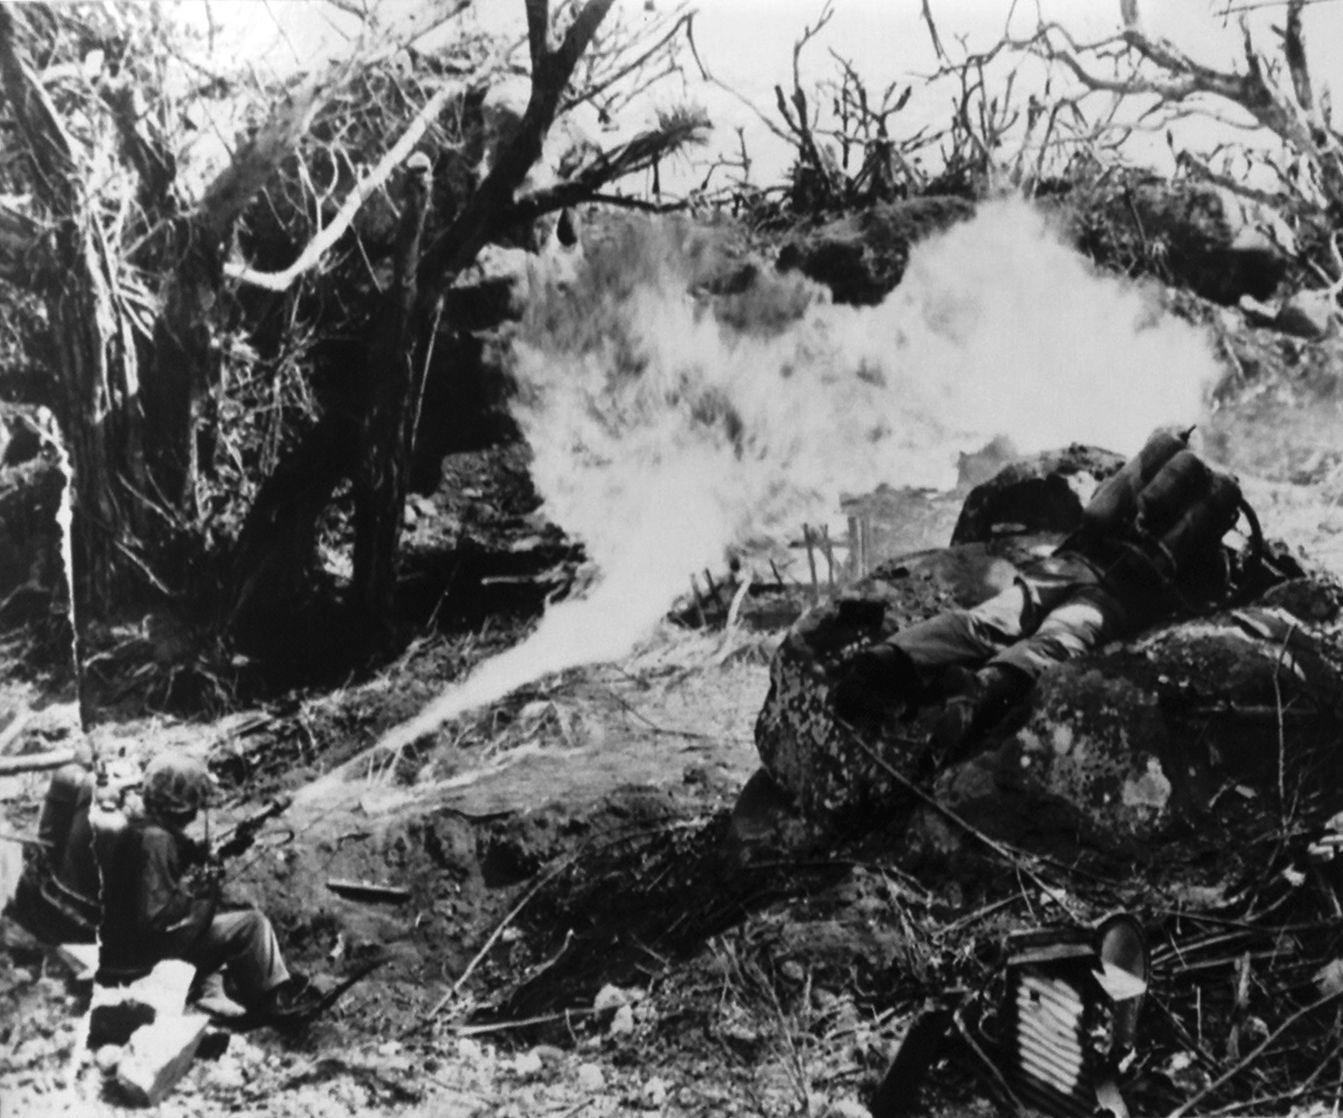 A Marine discharges a flamethrower to clear away thick brush that obscures a path across the islet of Betio. The flamethrowers were essential in the reduction of numerous Japanese strongpoints, burning defenders out of their virtually impenetrable bunkers of steel-reinforced concrete, coconut logs, and sand.